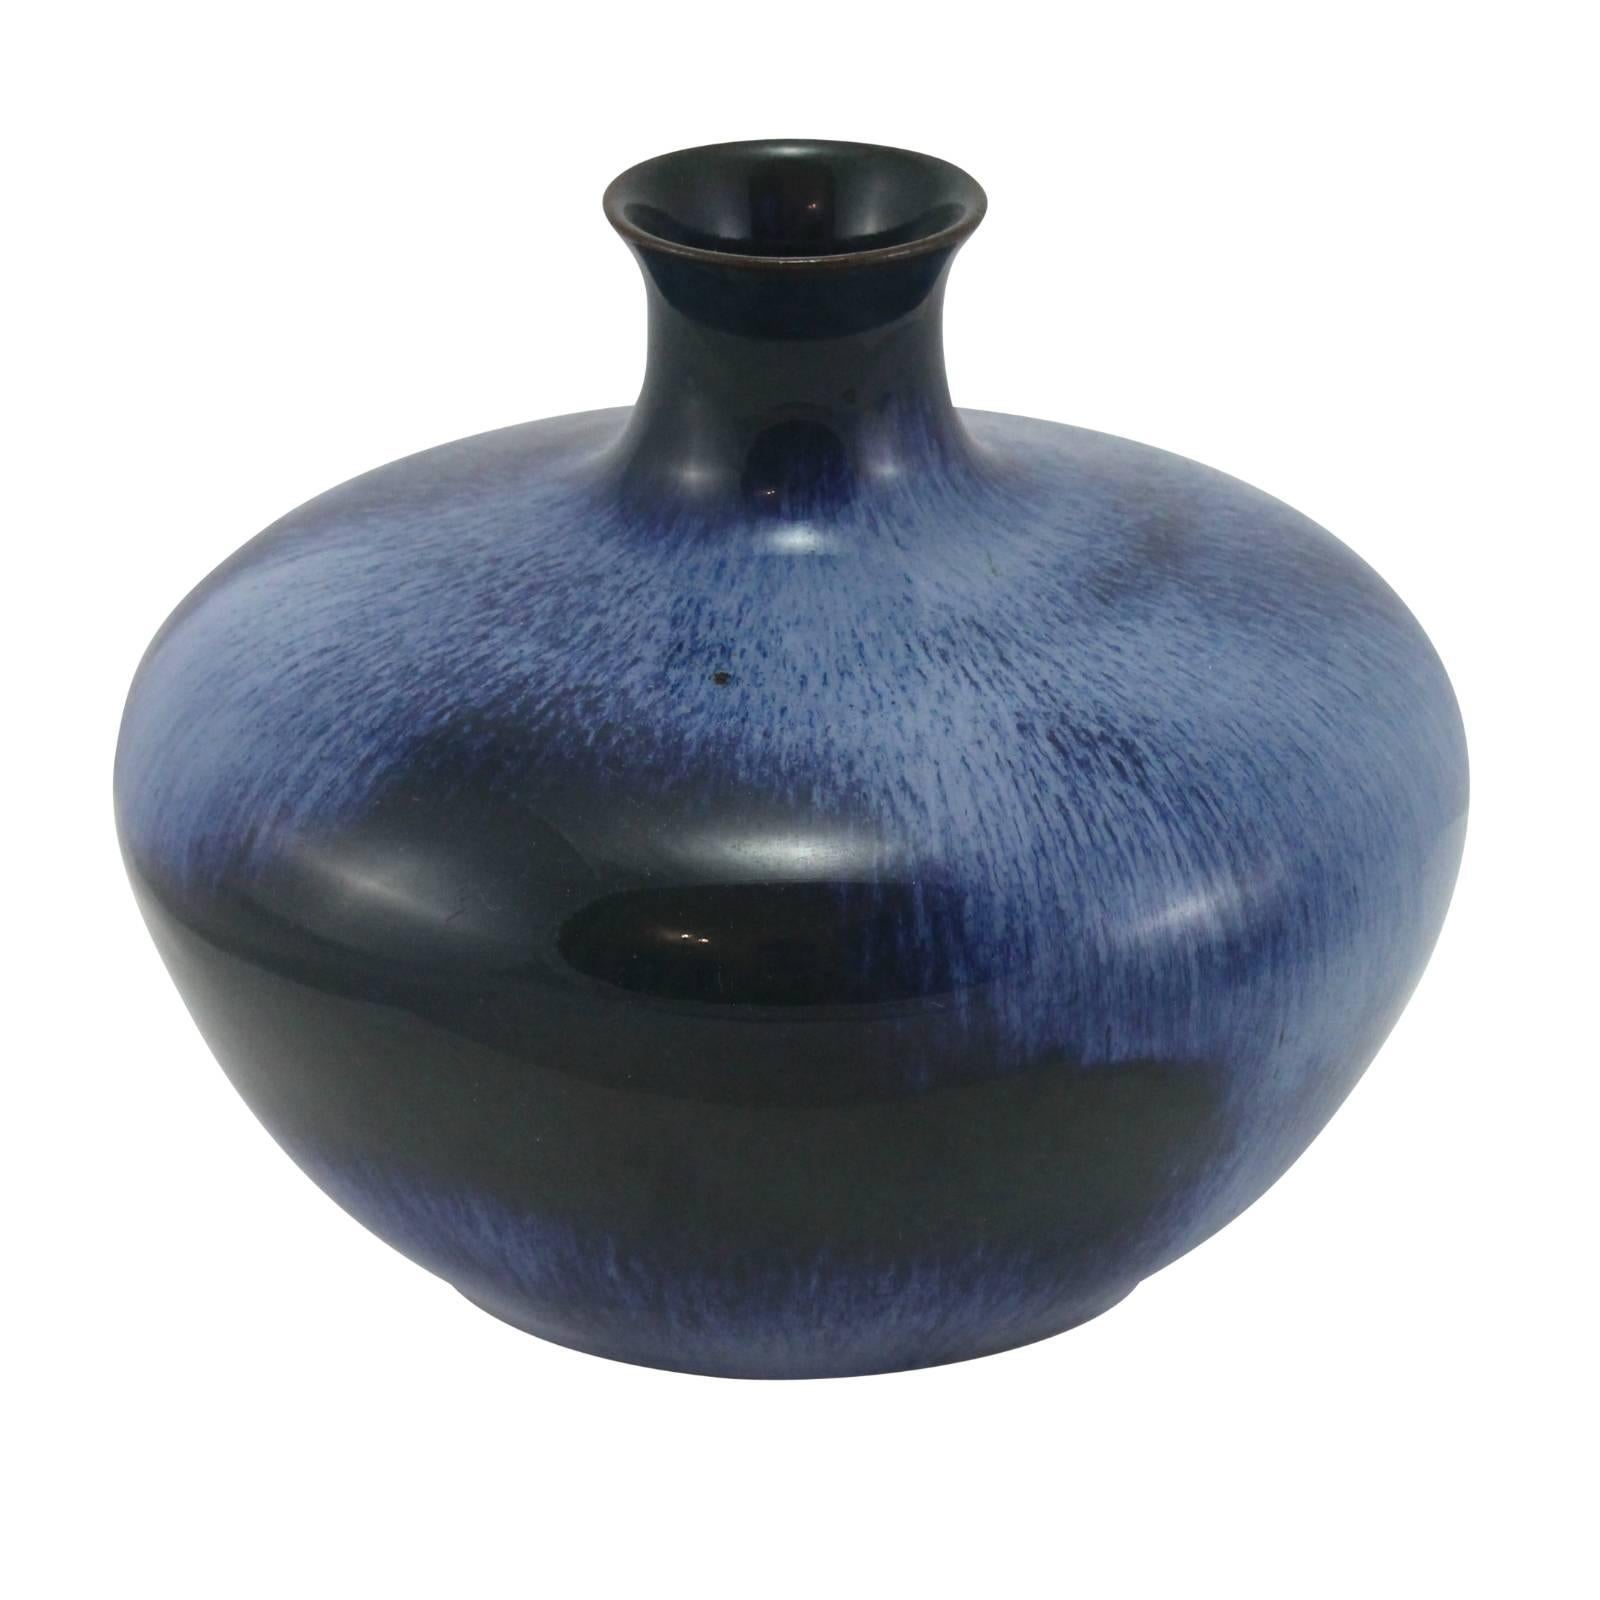 A blue and black glazed Arts and Crafts ceramic vase by the Ashby Potters Guild.